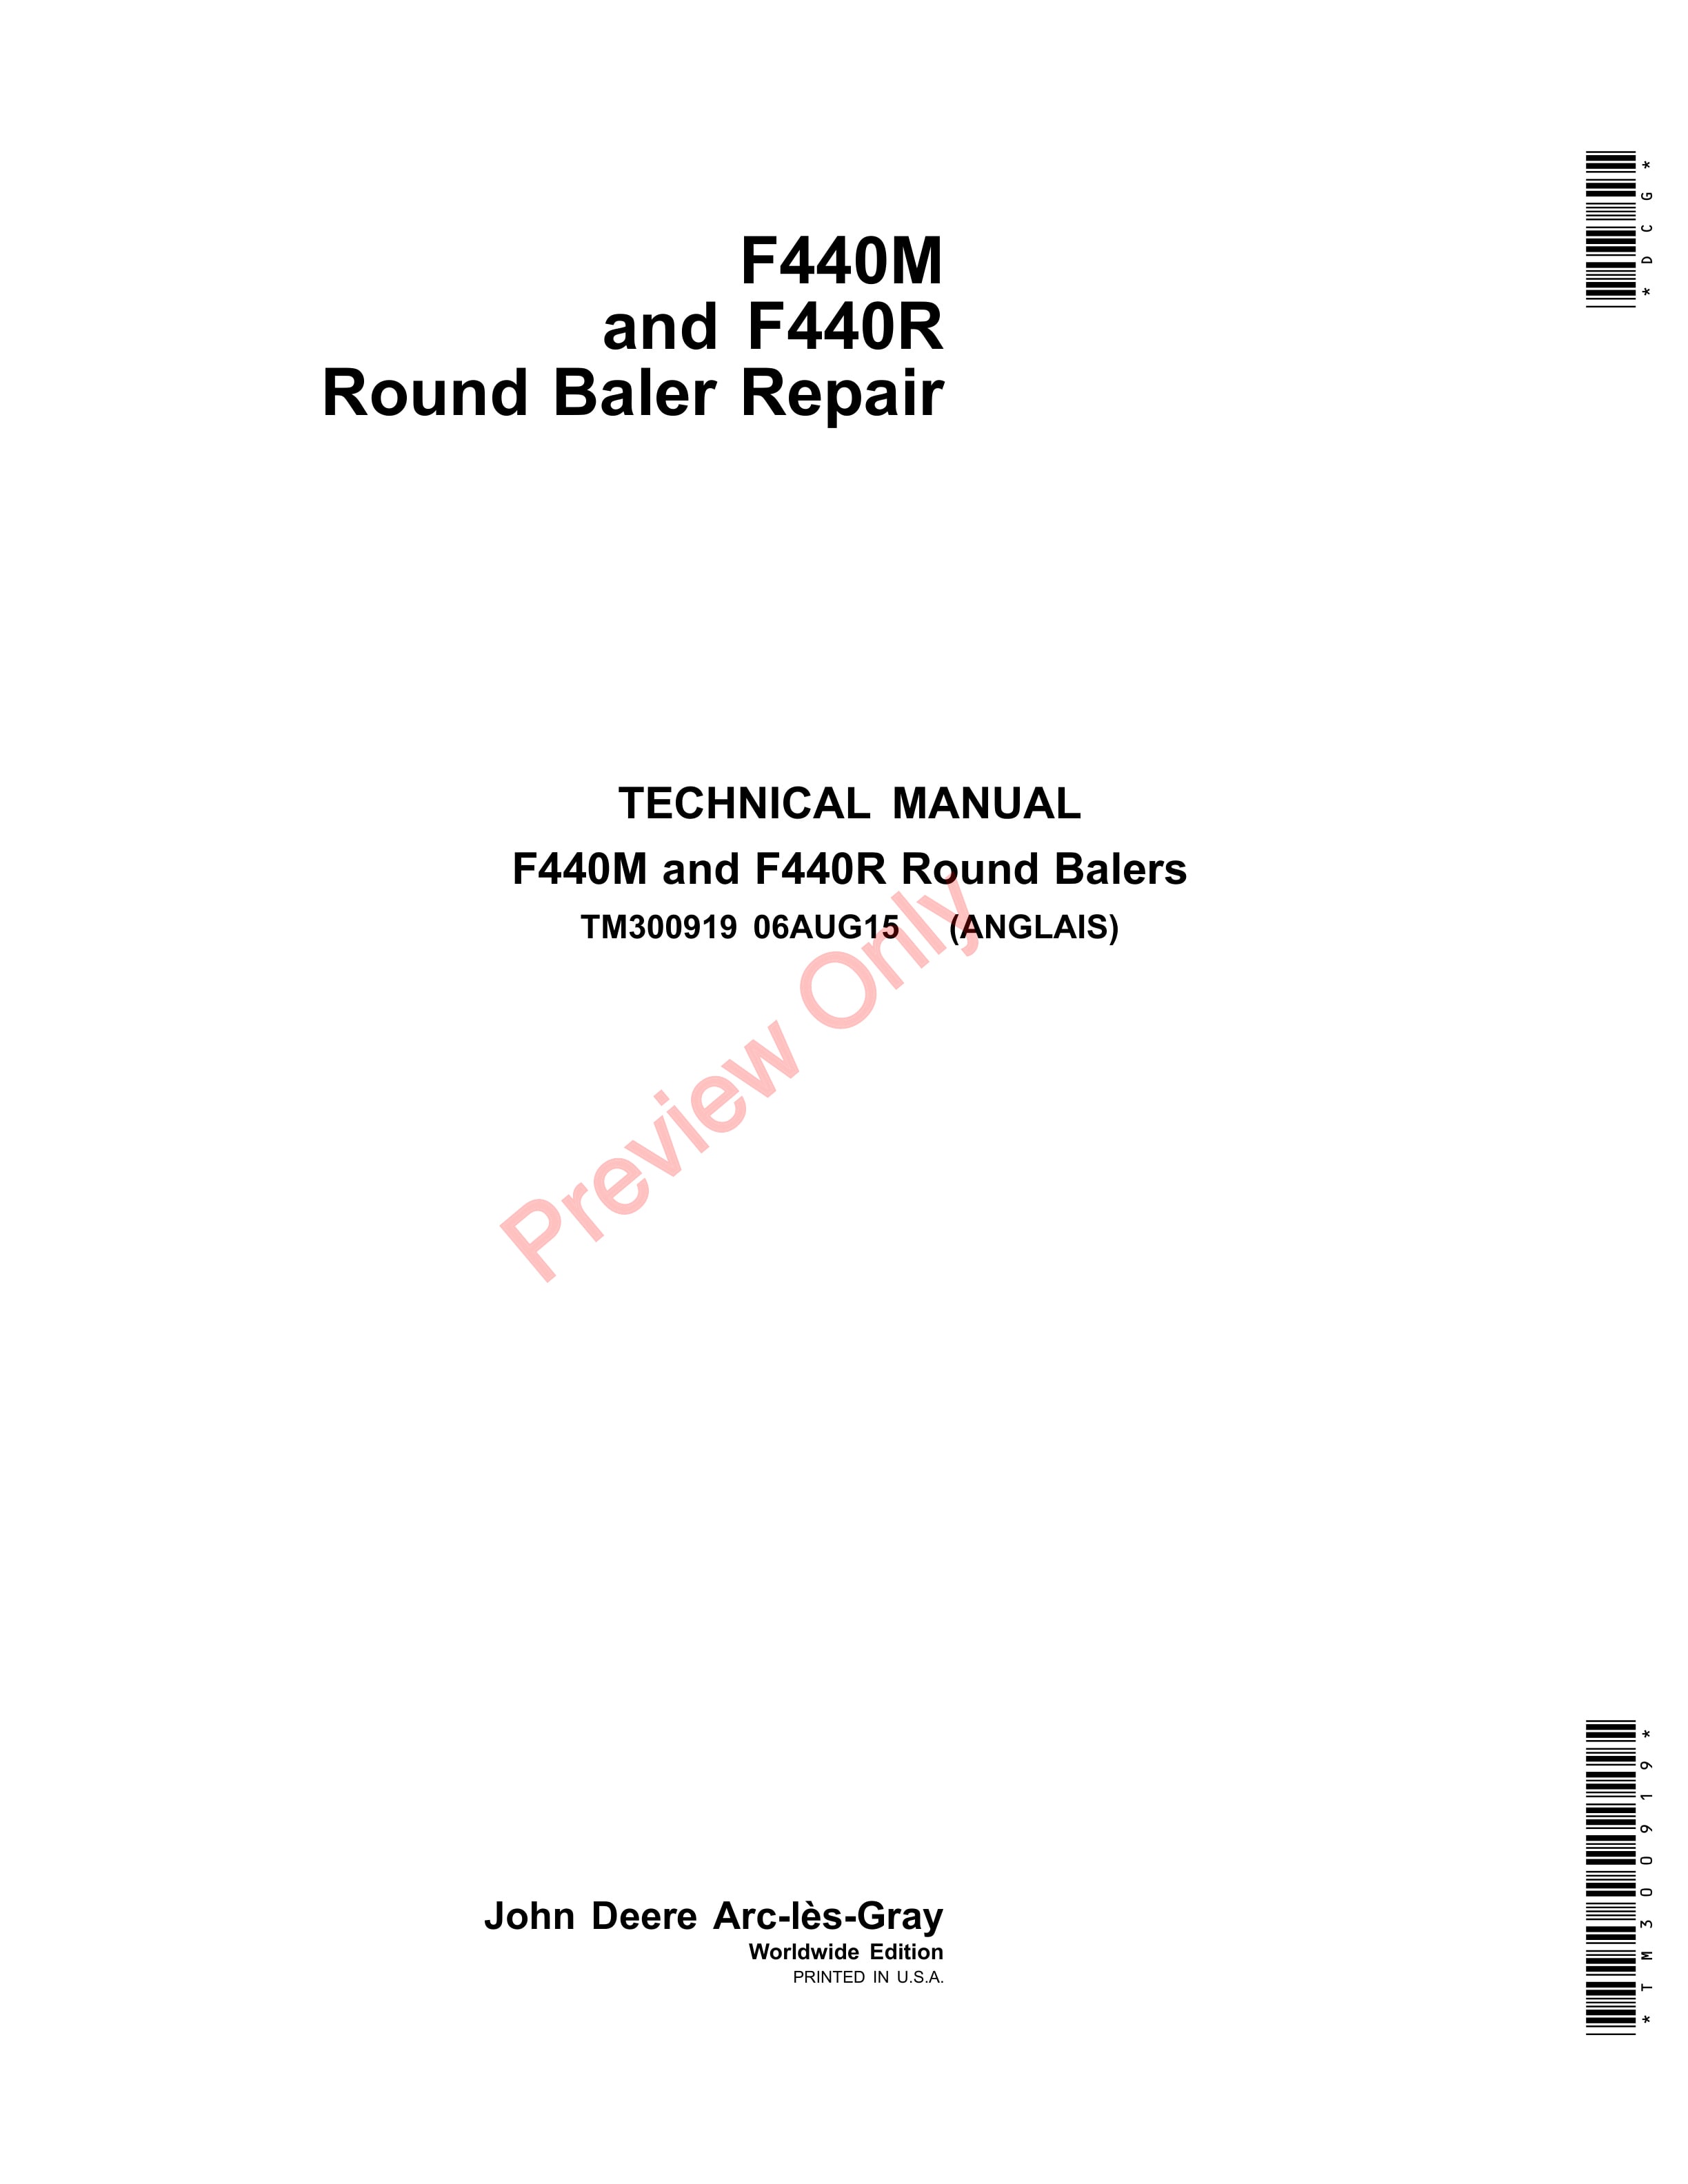 John Deere F440M and F440R Round Balers Technical Manual TM300919 06AUG15 1